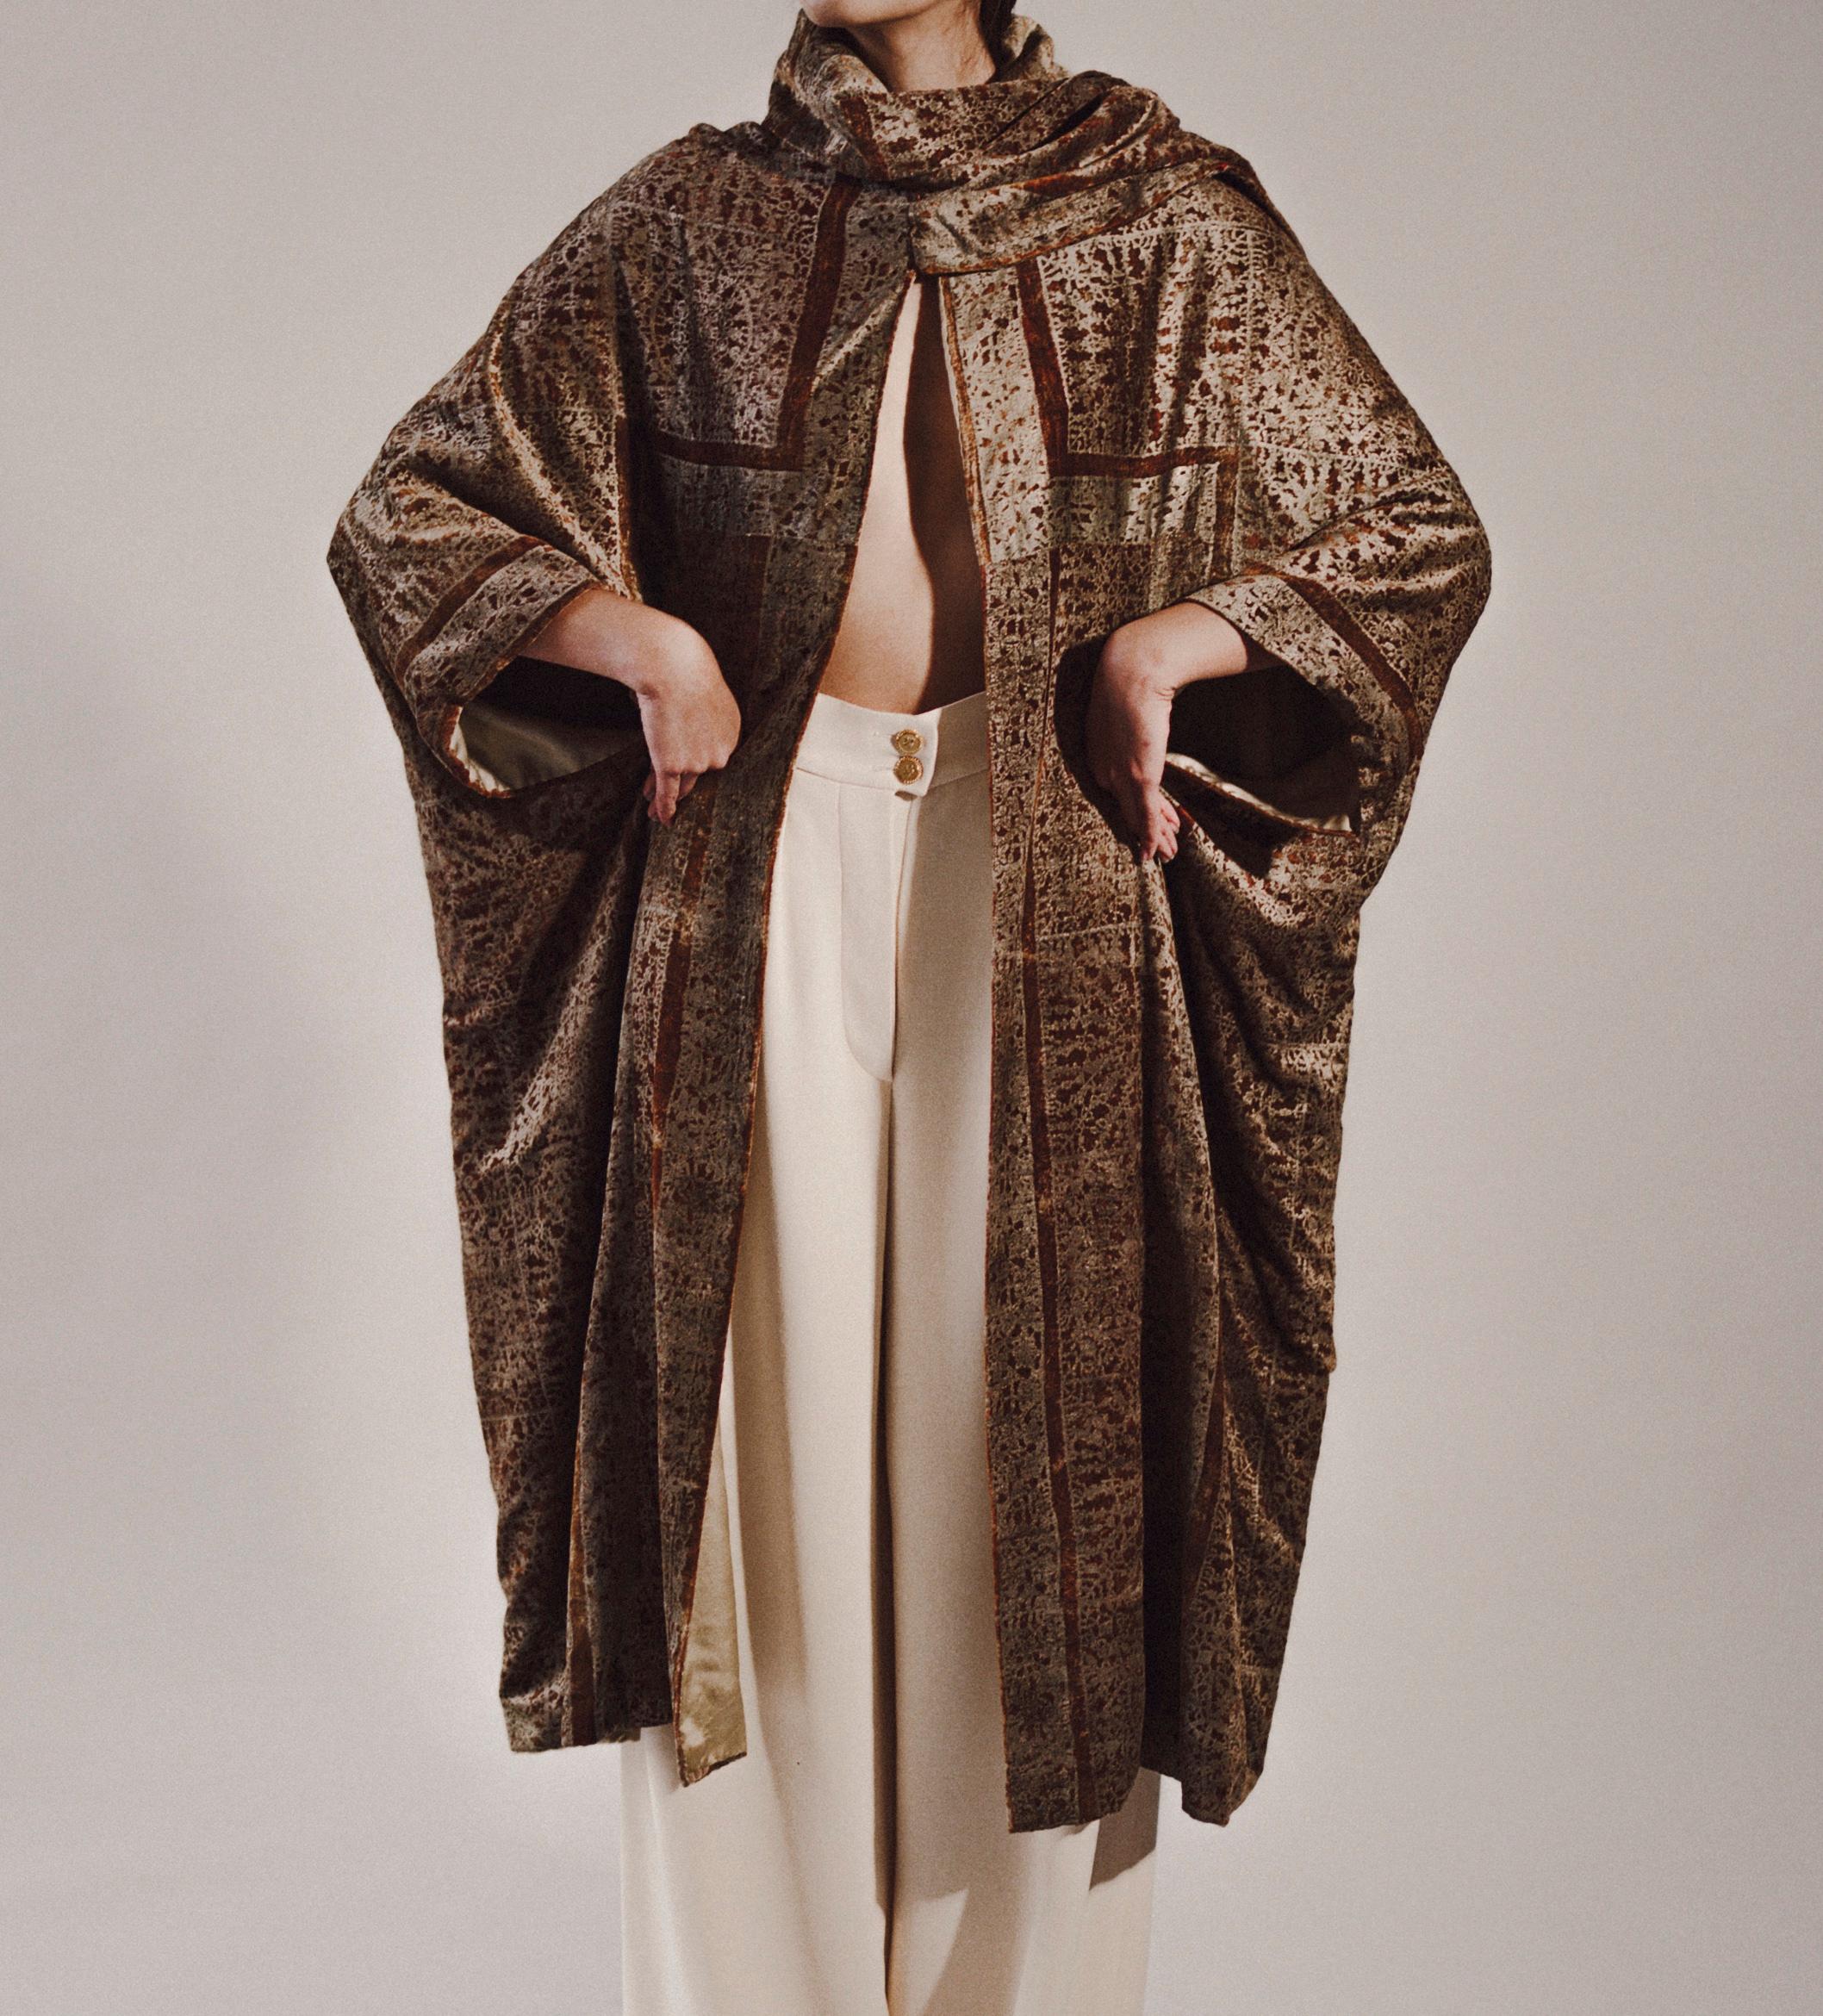 Exquisite 1930’s Mariano Fortuny gold stenciled evening coat. Featuring a button closure and asymmetric neck wrap, lined in champagne silk, and signature ‘Mariano Fortuny Venise’ stamp. 

Provenance: from the “Temple of Wings” Ann and Gordon Getty